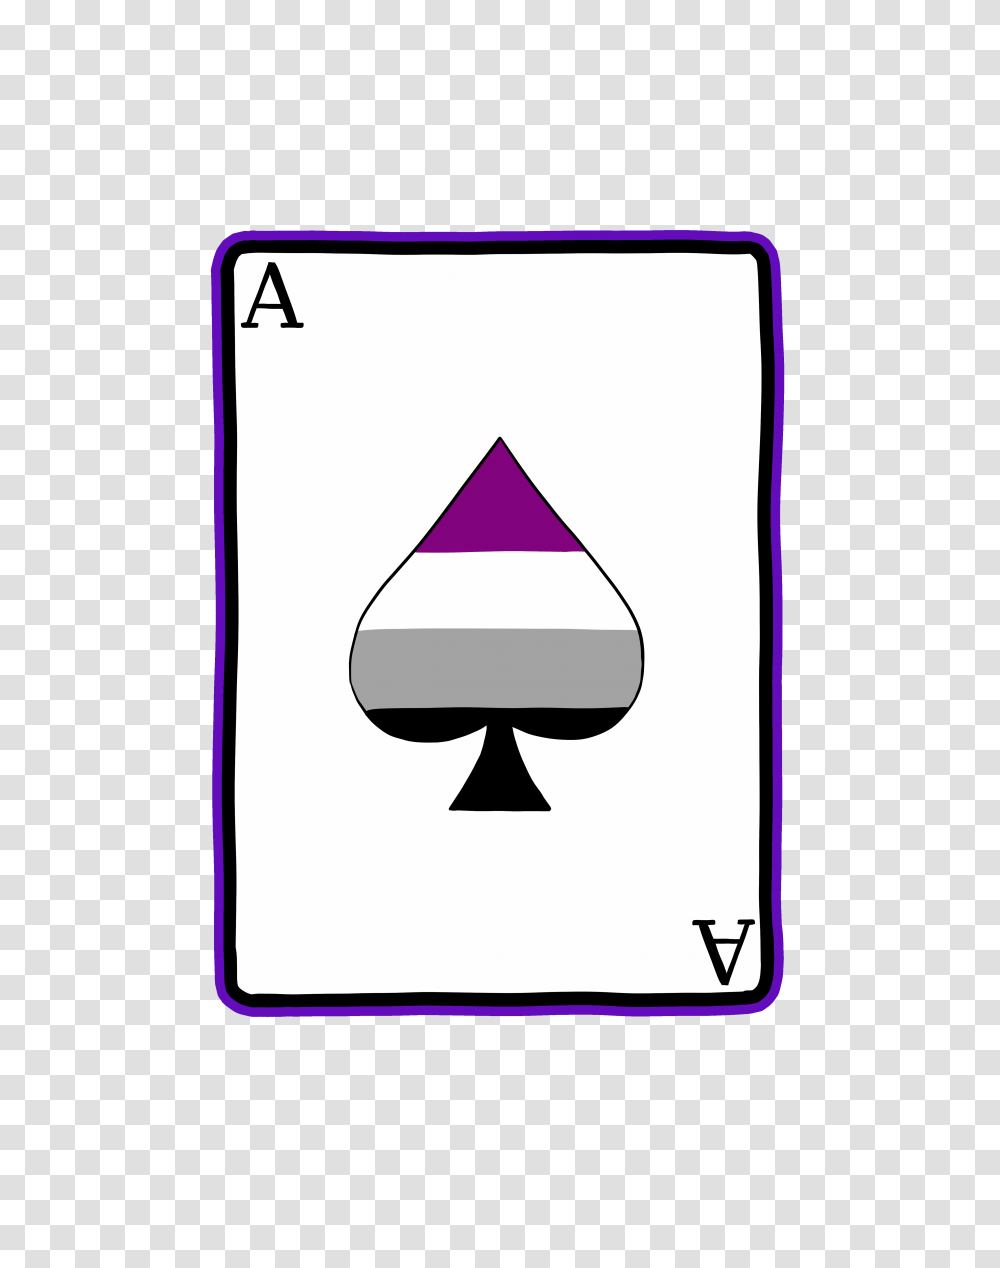 Playing The Ace Card Artworktee, Triangle Transparent Png